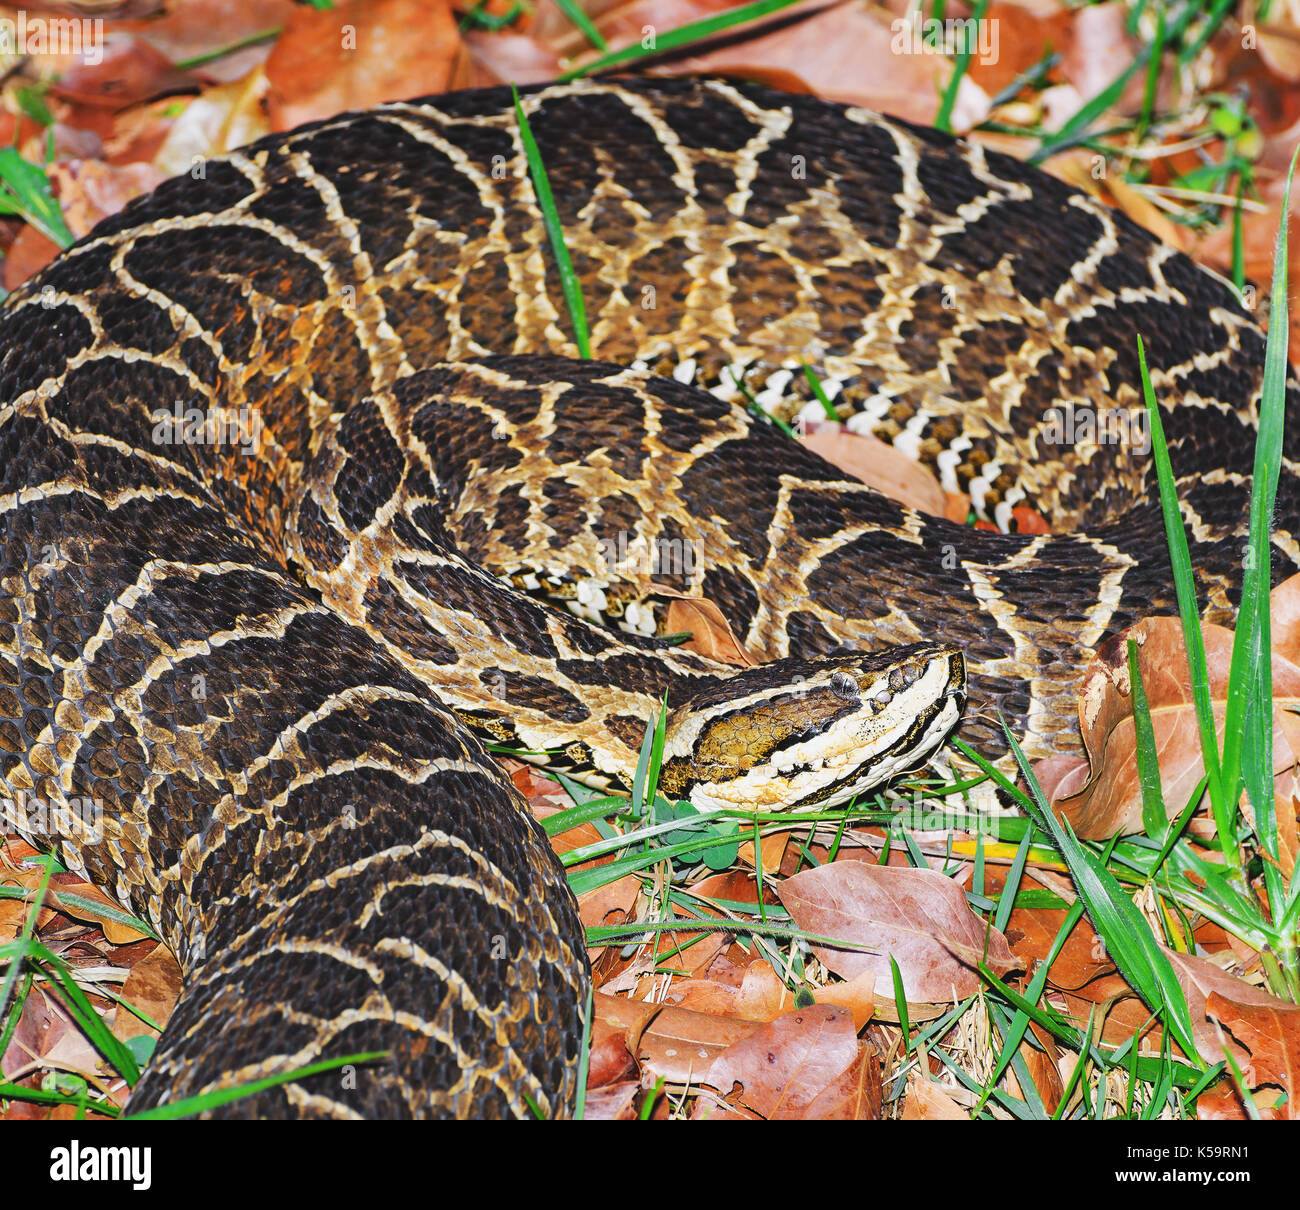 Snake Bothrops known as Jararaca in Brazil. Snake camouflaged between dry leaves and grass with a deadly venom. Stock Photo